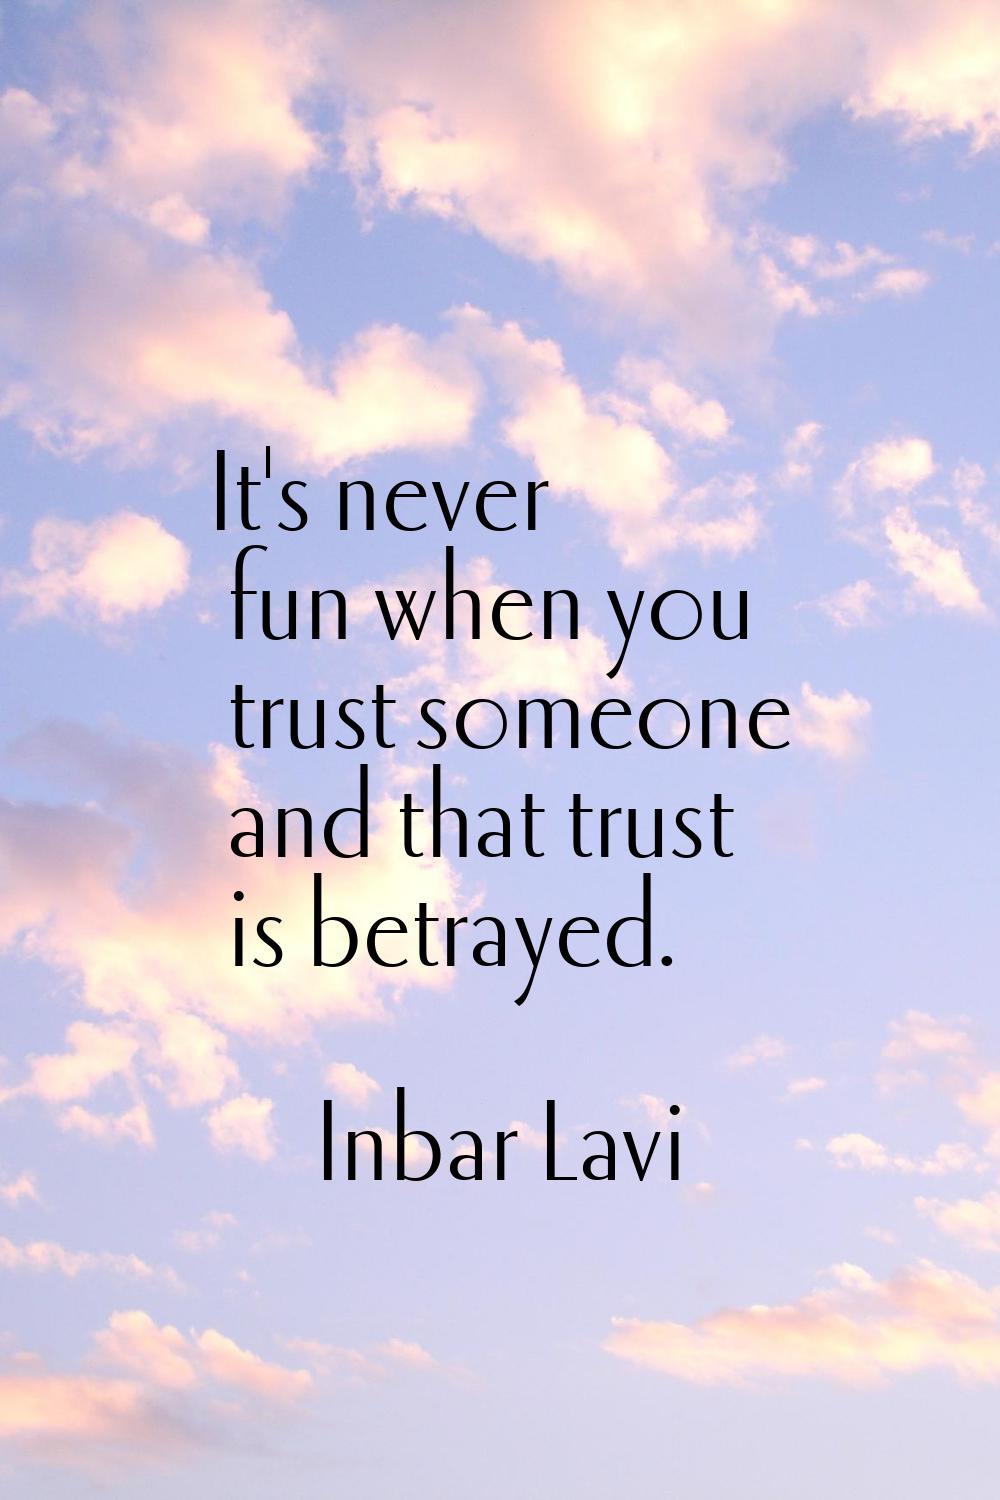 It's never fun when you trust someone and that trust is betrayed.